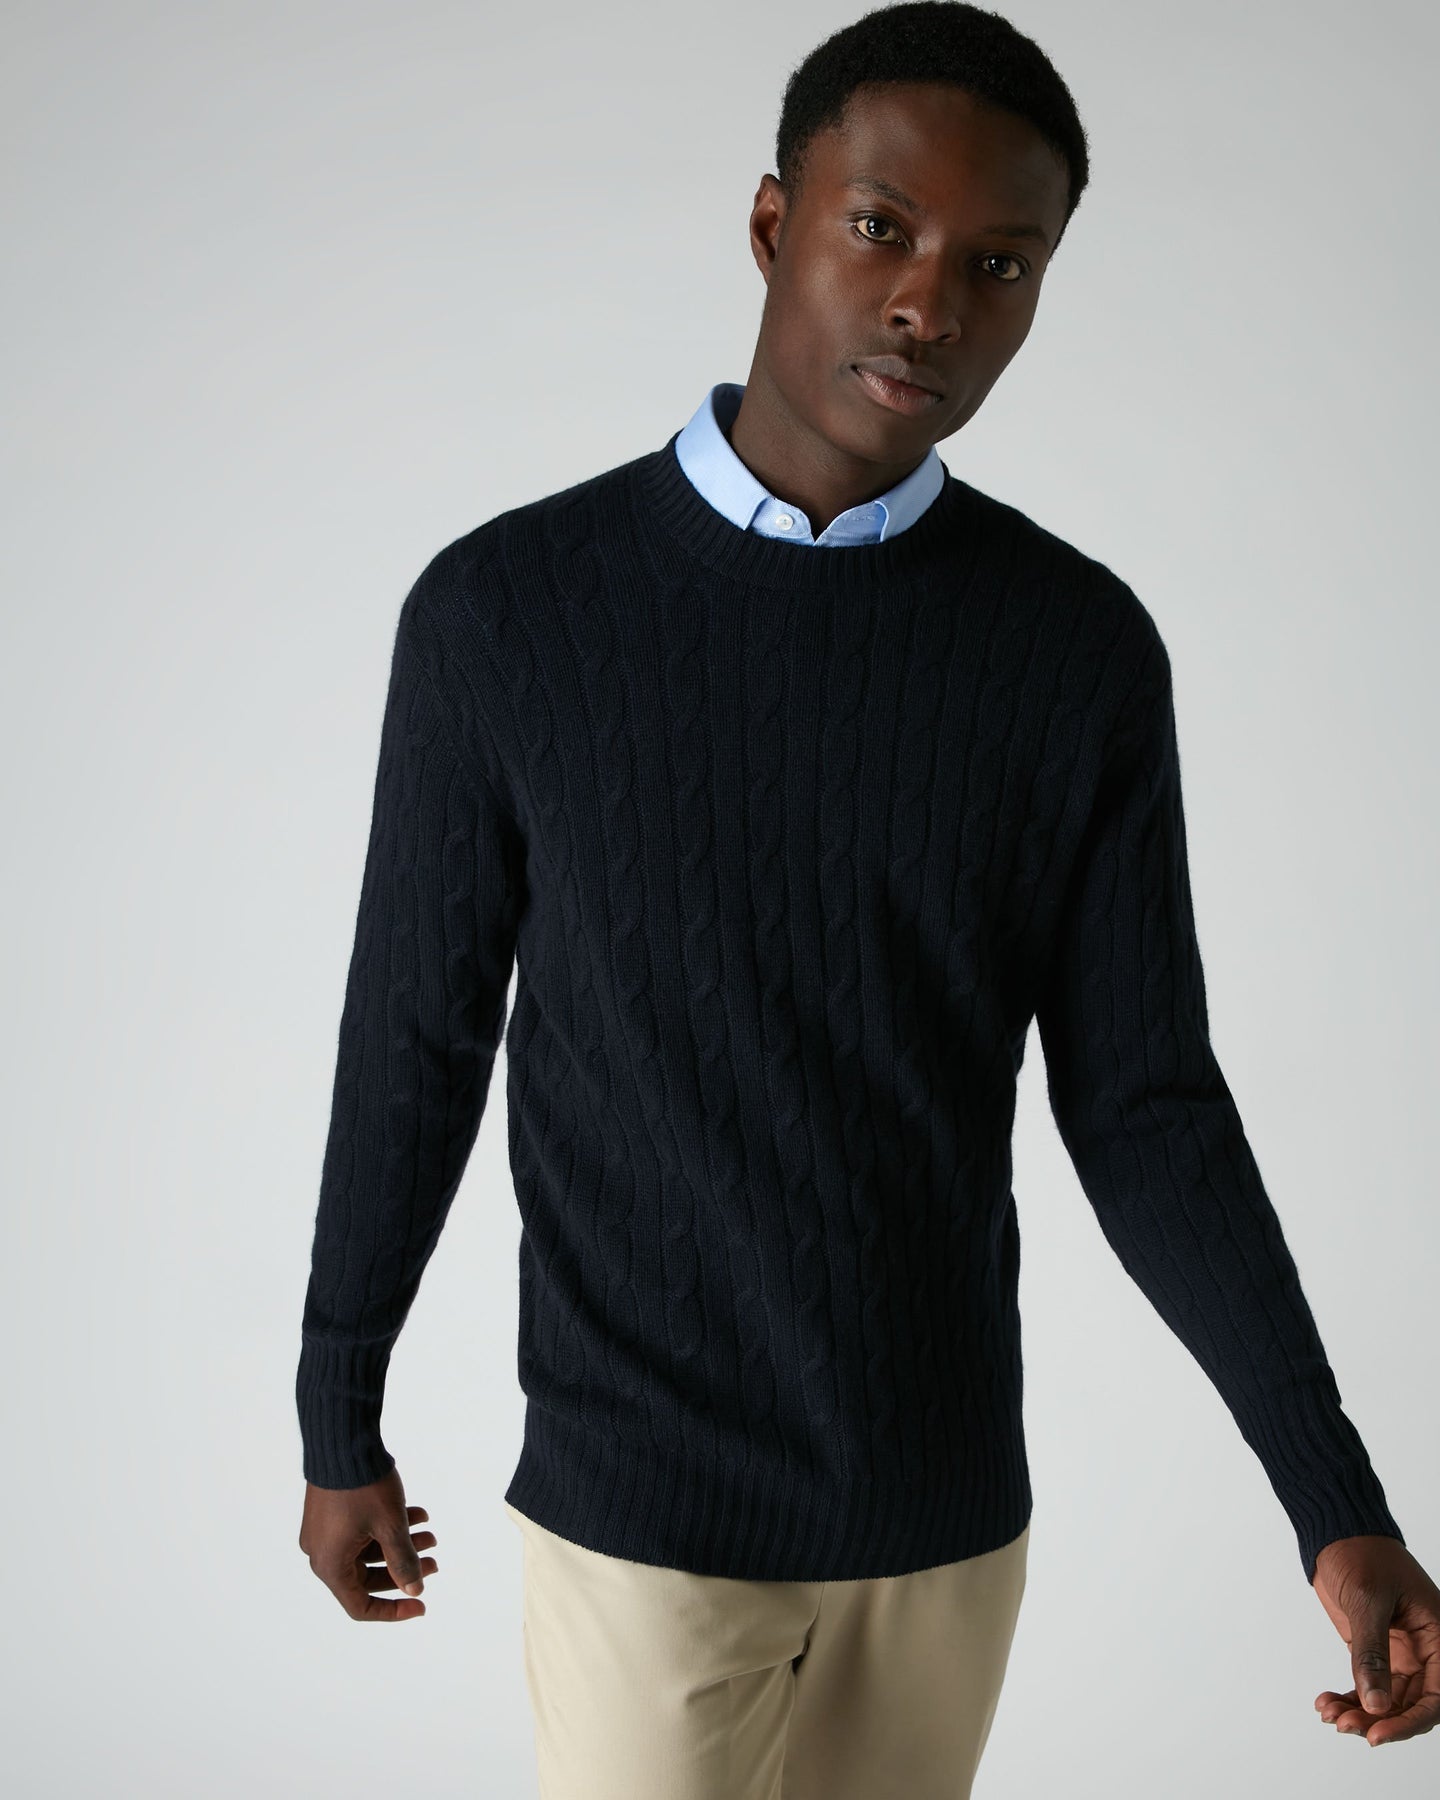 007 Cable Crew Neck Sweater Navy Blue | N.Peal